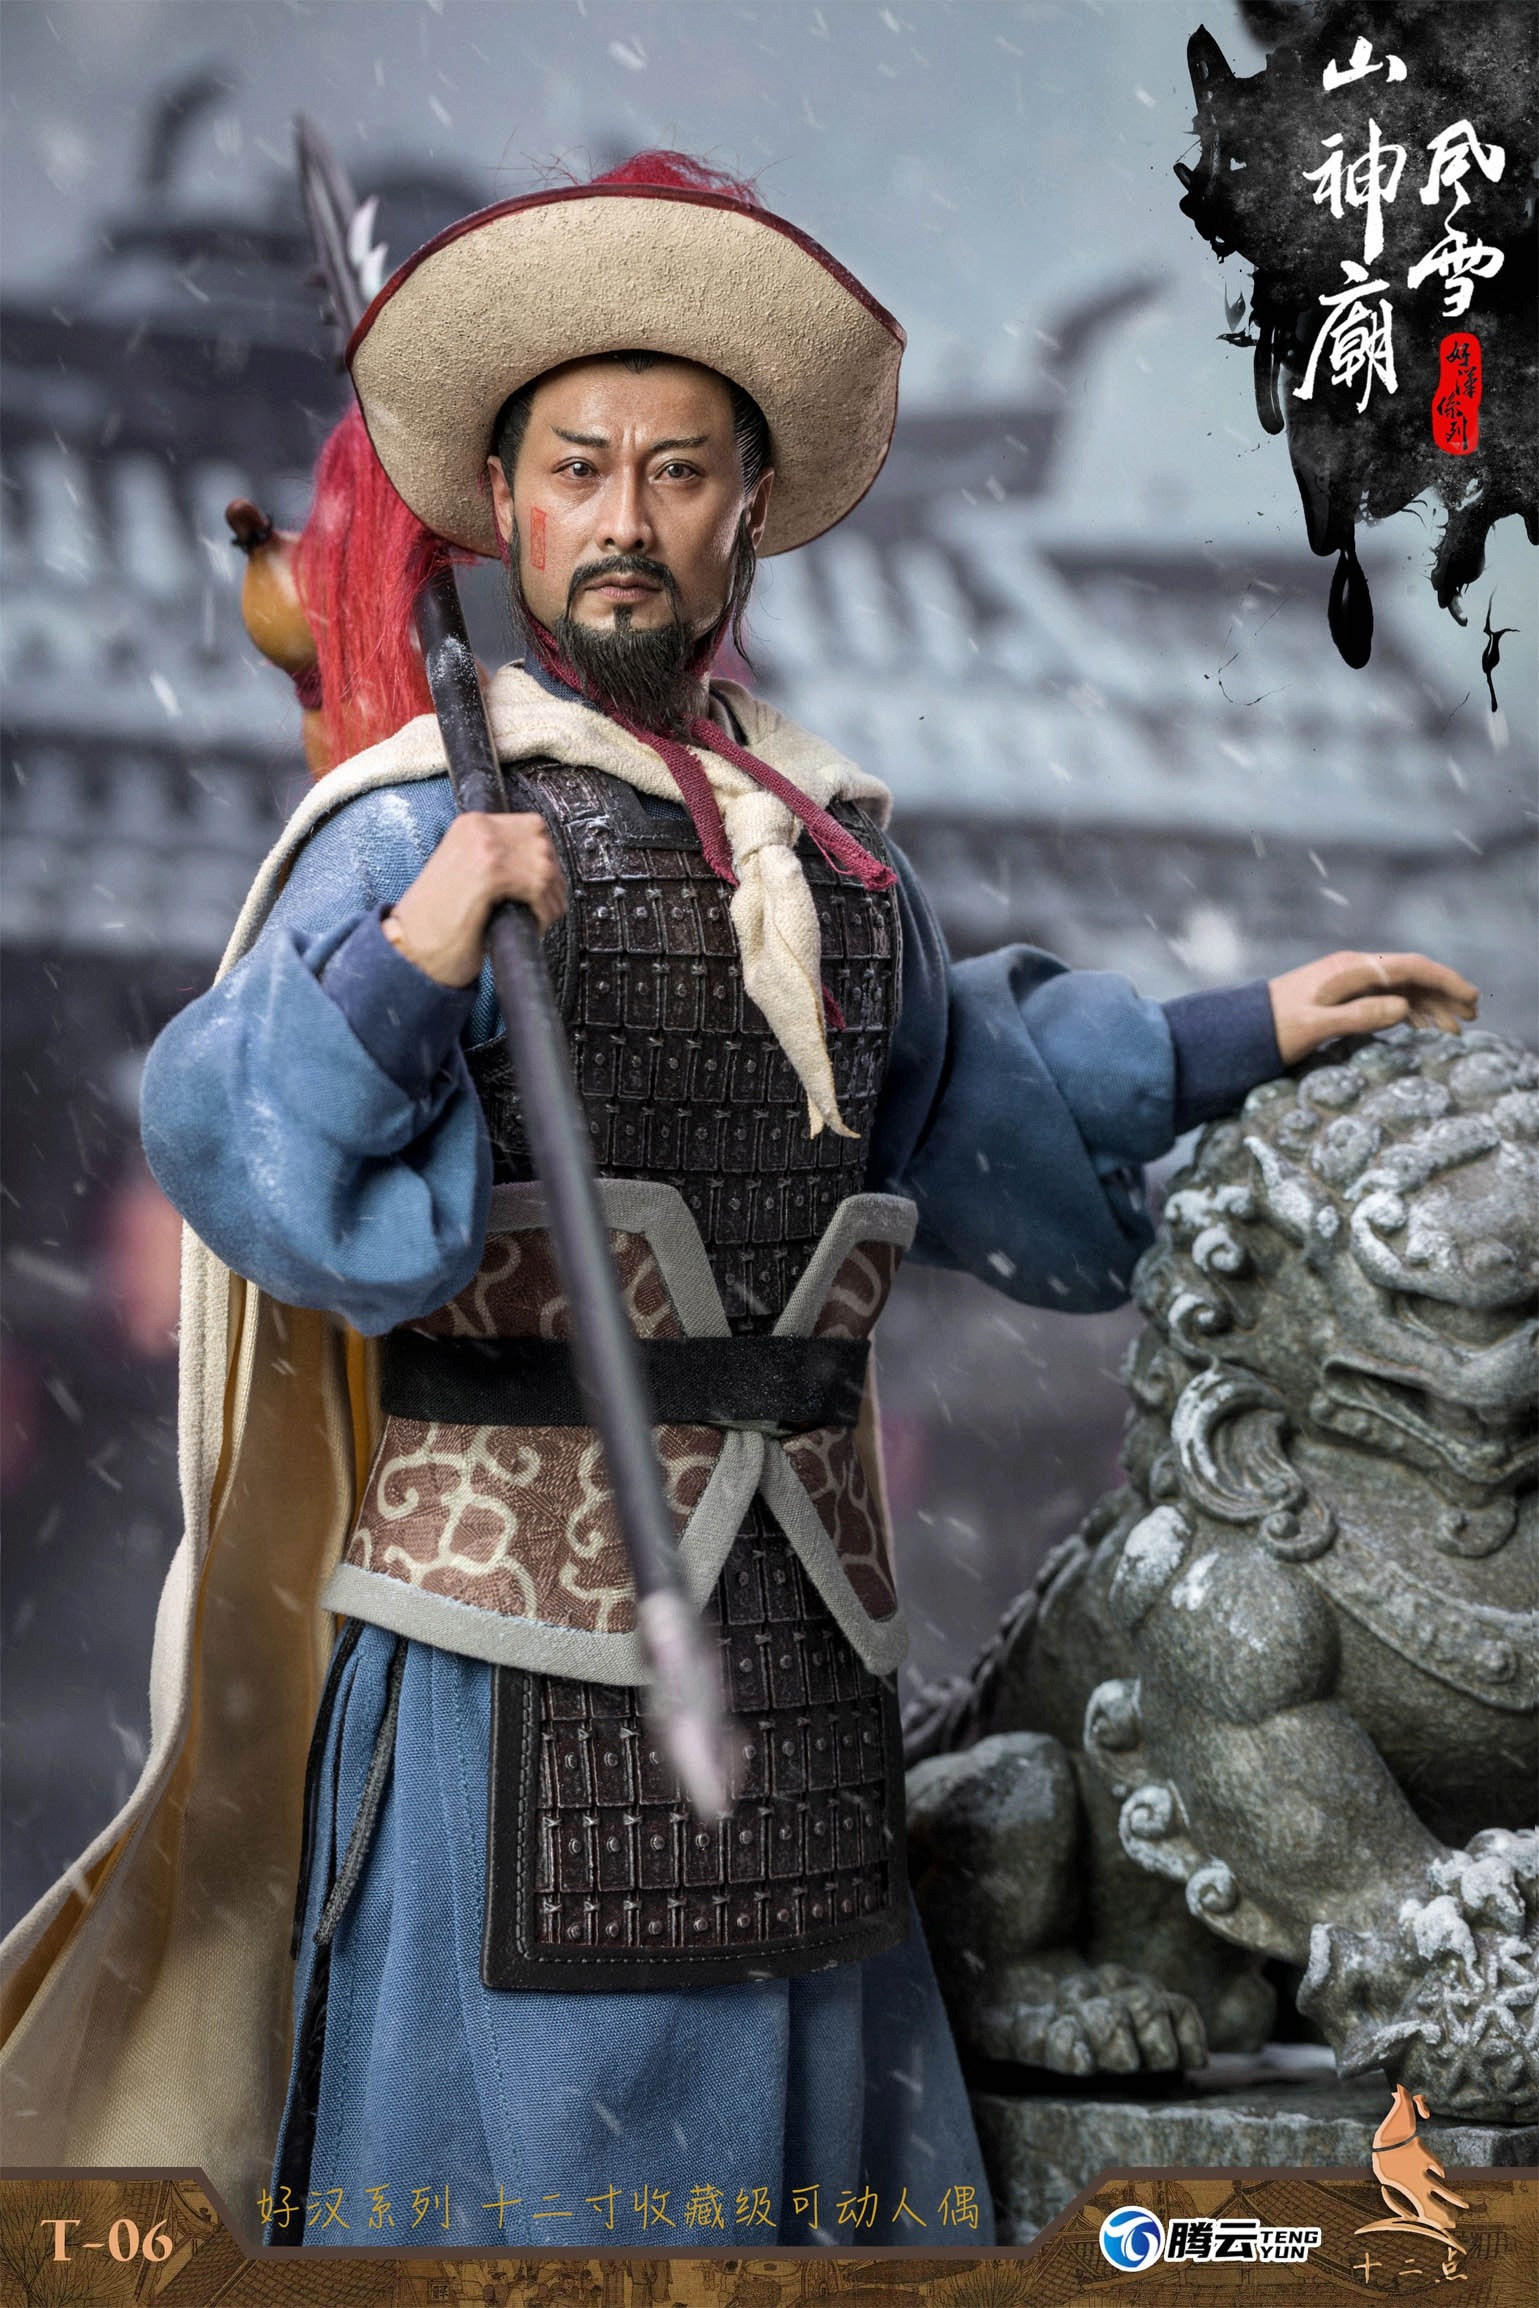 NEW PRODUCT: Twelve - Hero Series - Leopard Head Lin Chong Fengxue Mountain Temple Action Figure (T-05 /T-06) 3319